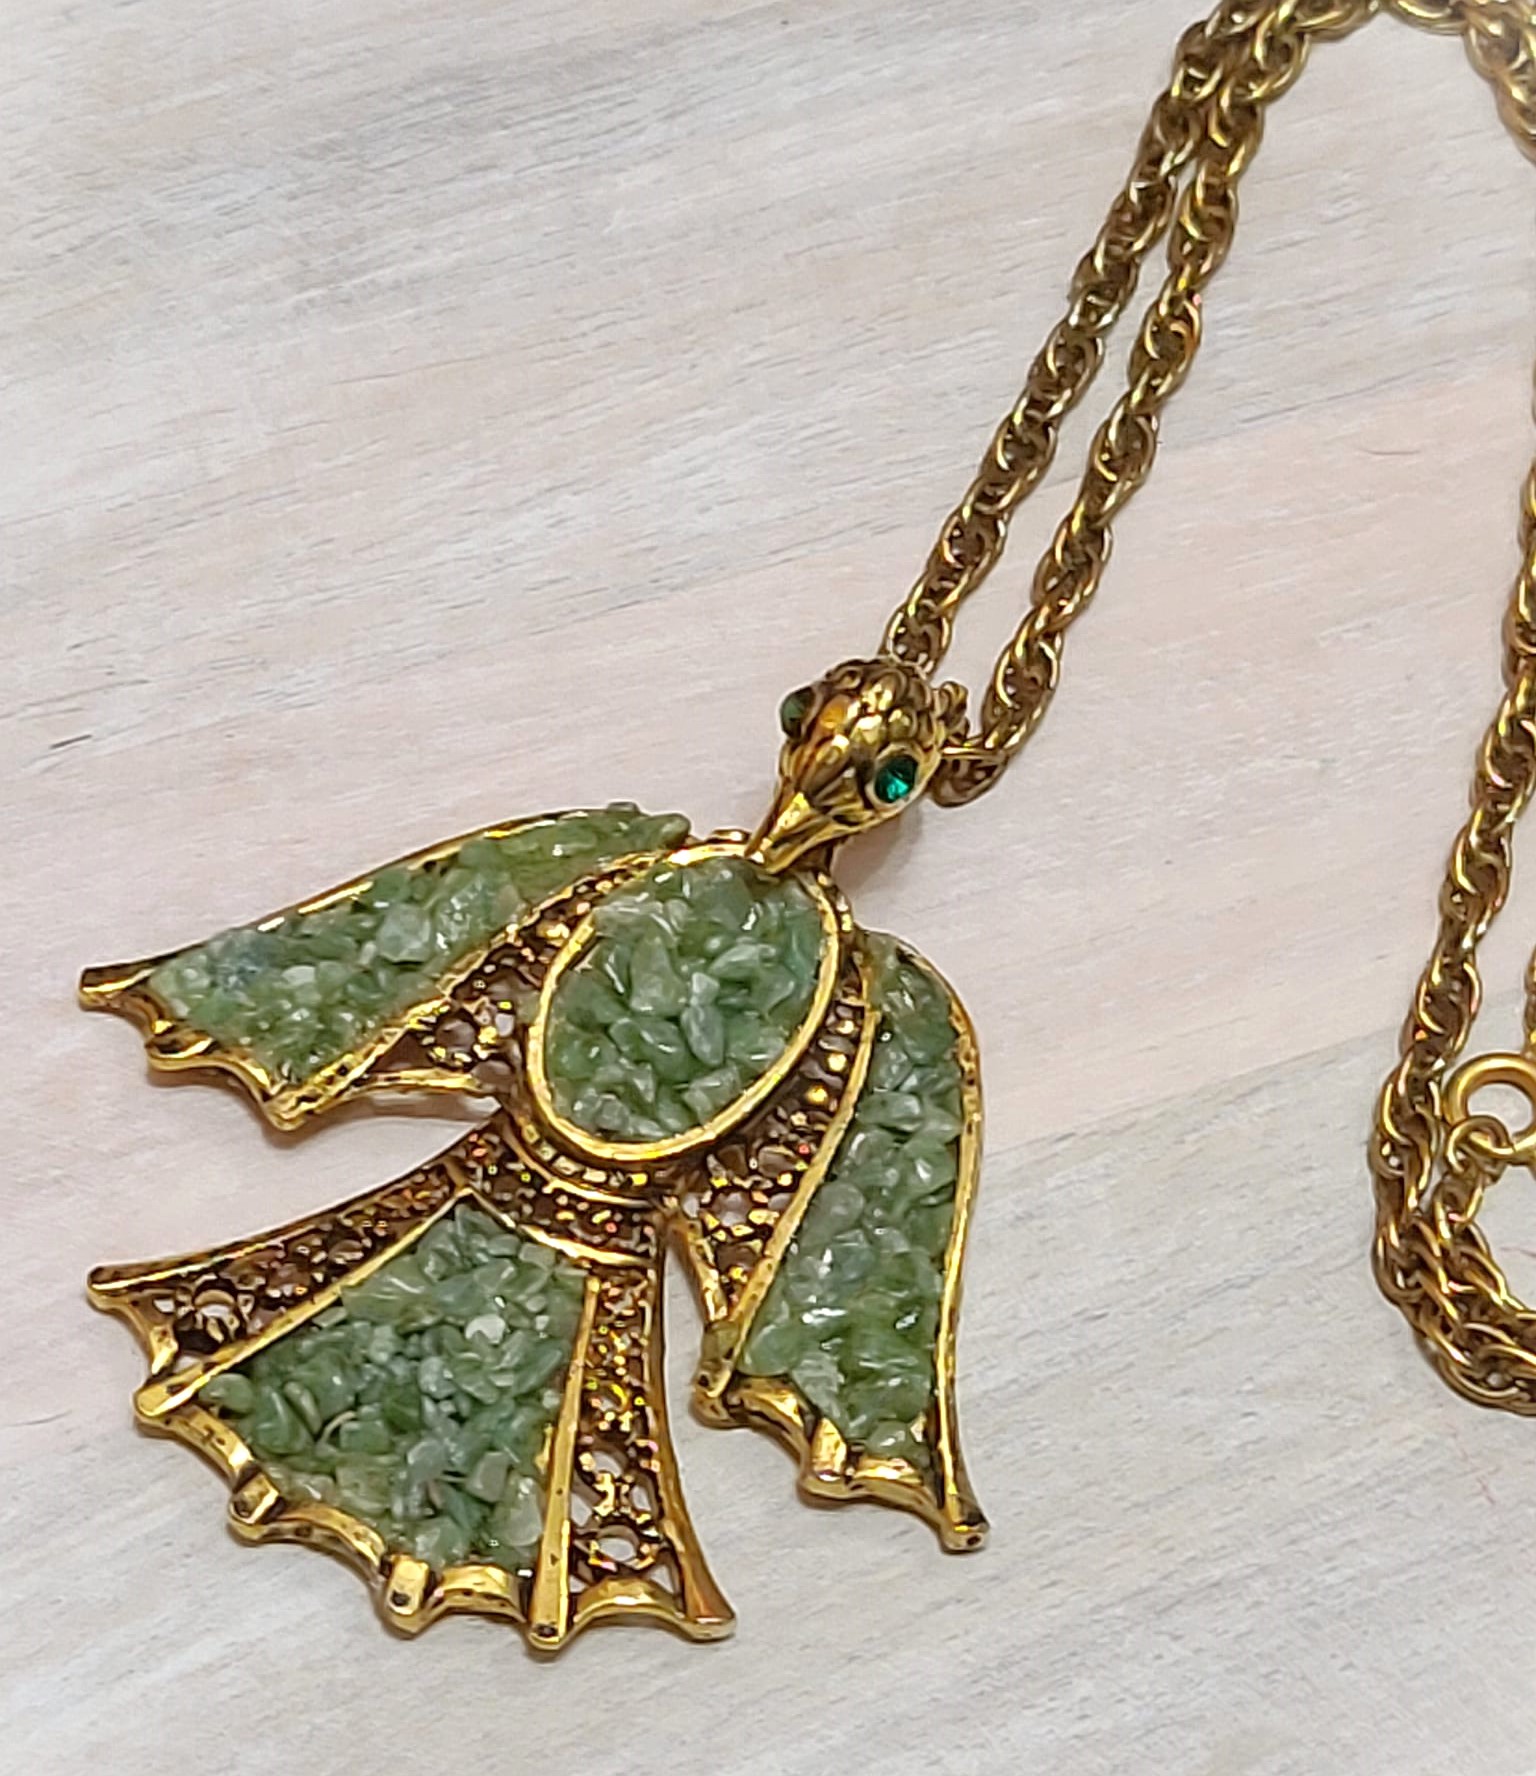 Phoenix pendant necklace with jade gemstone chips on chain